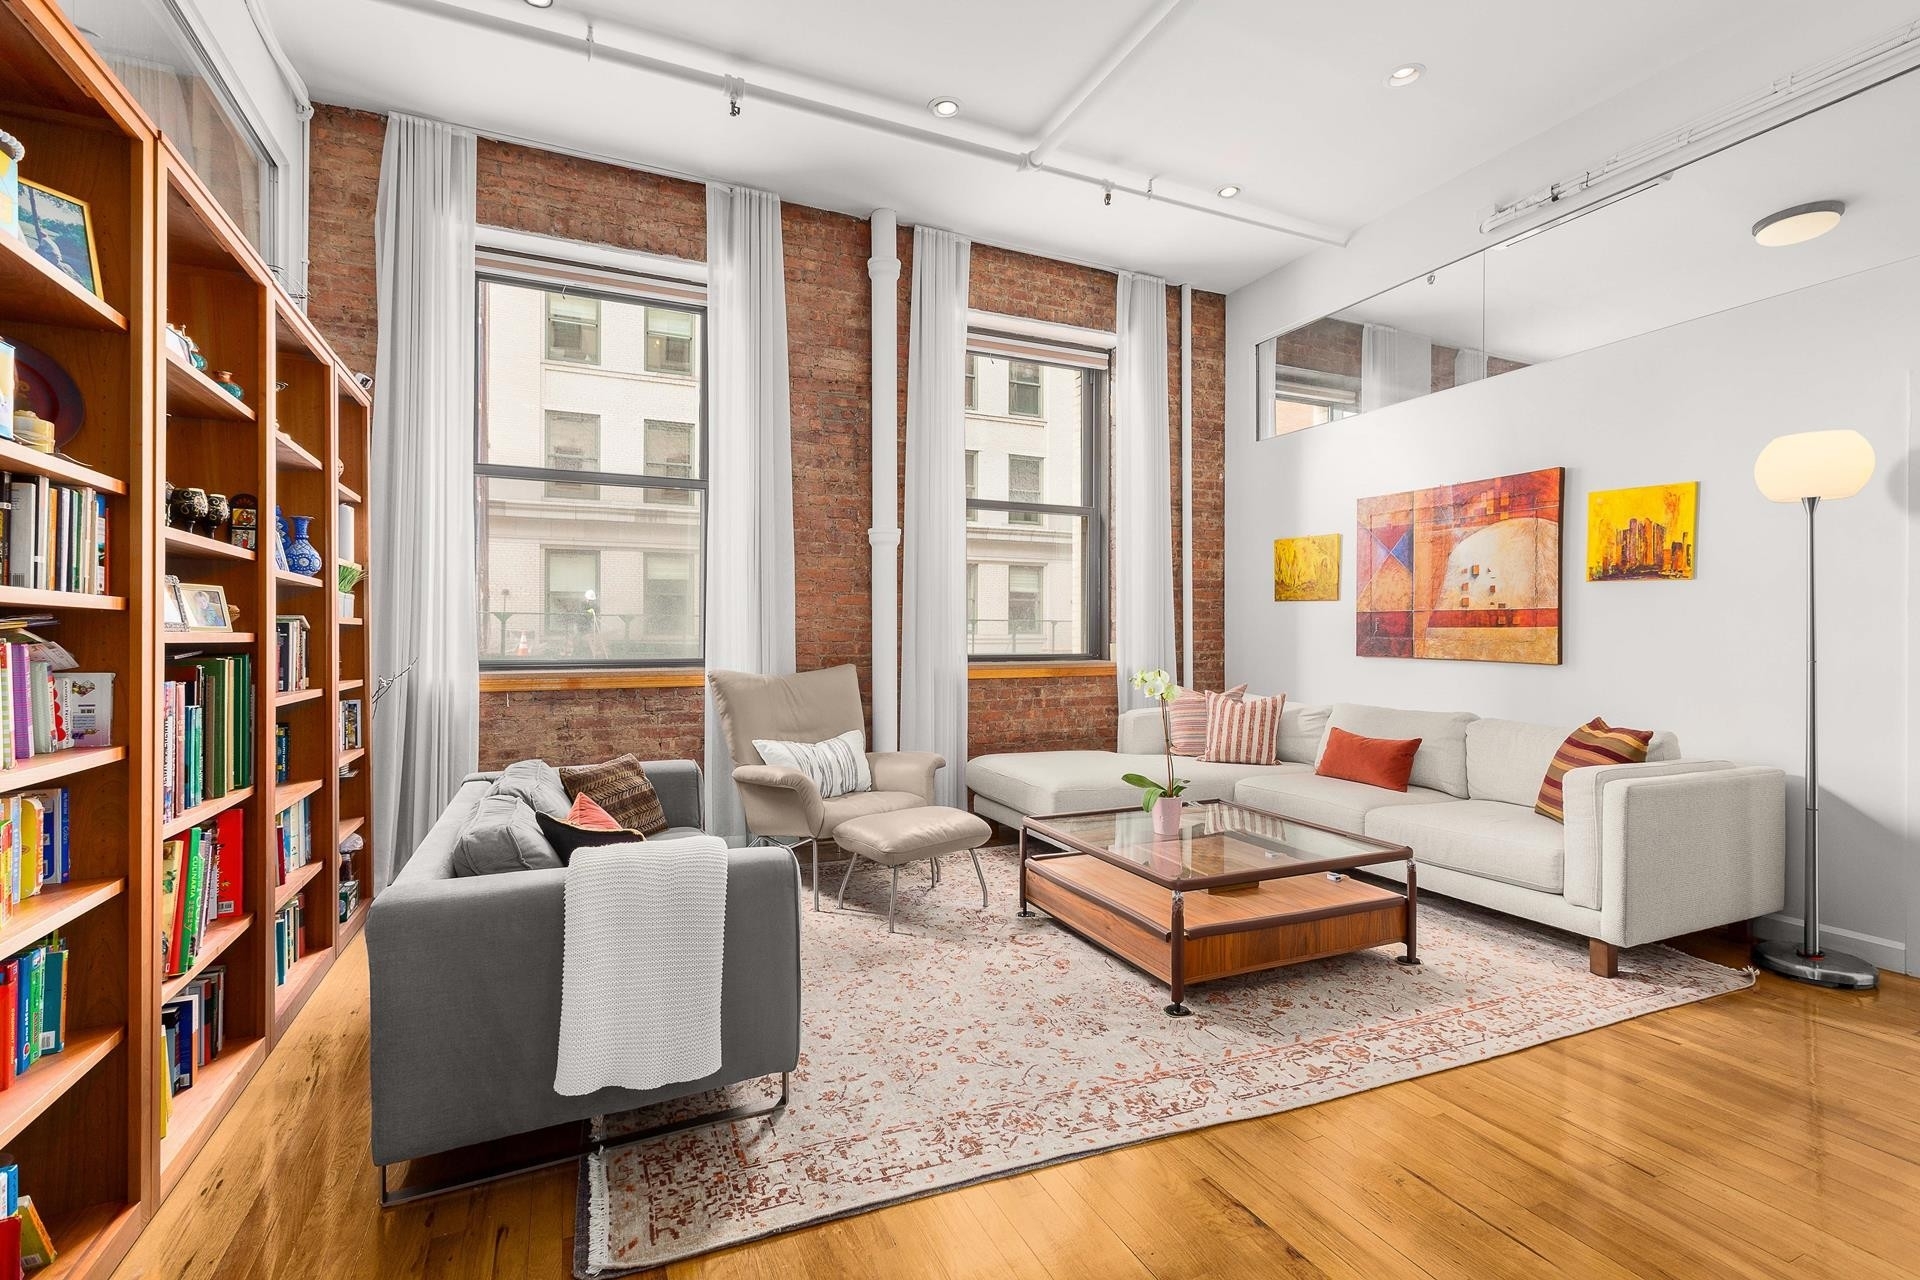 Co-op Properties for Sale at SILK AND SPICE, 165 HUDSON ST, 2B TriBeCa, New York, New York 10013